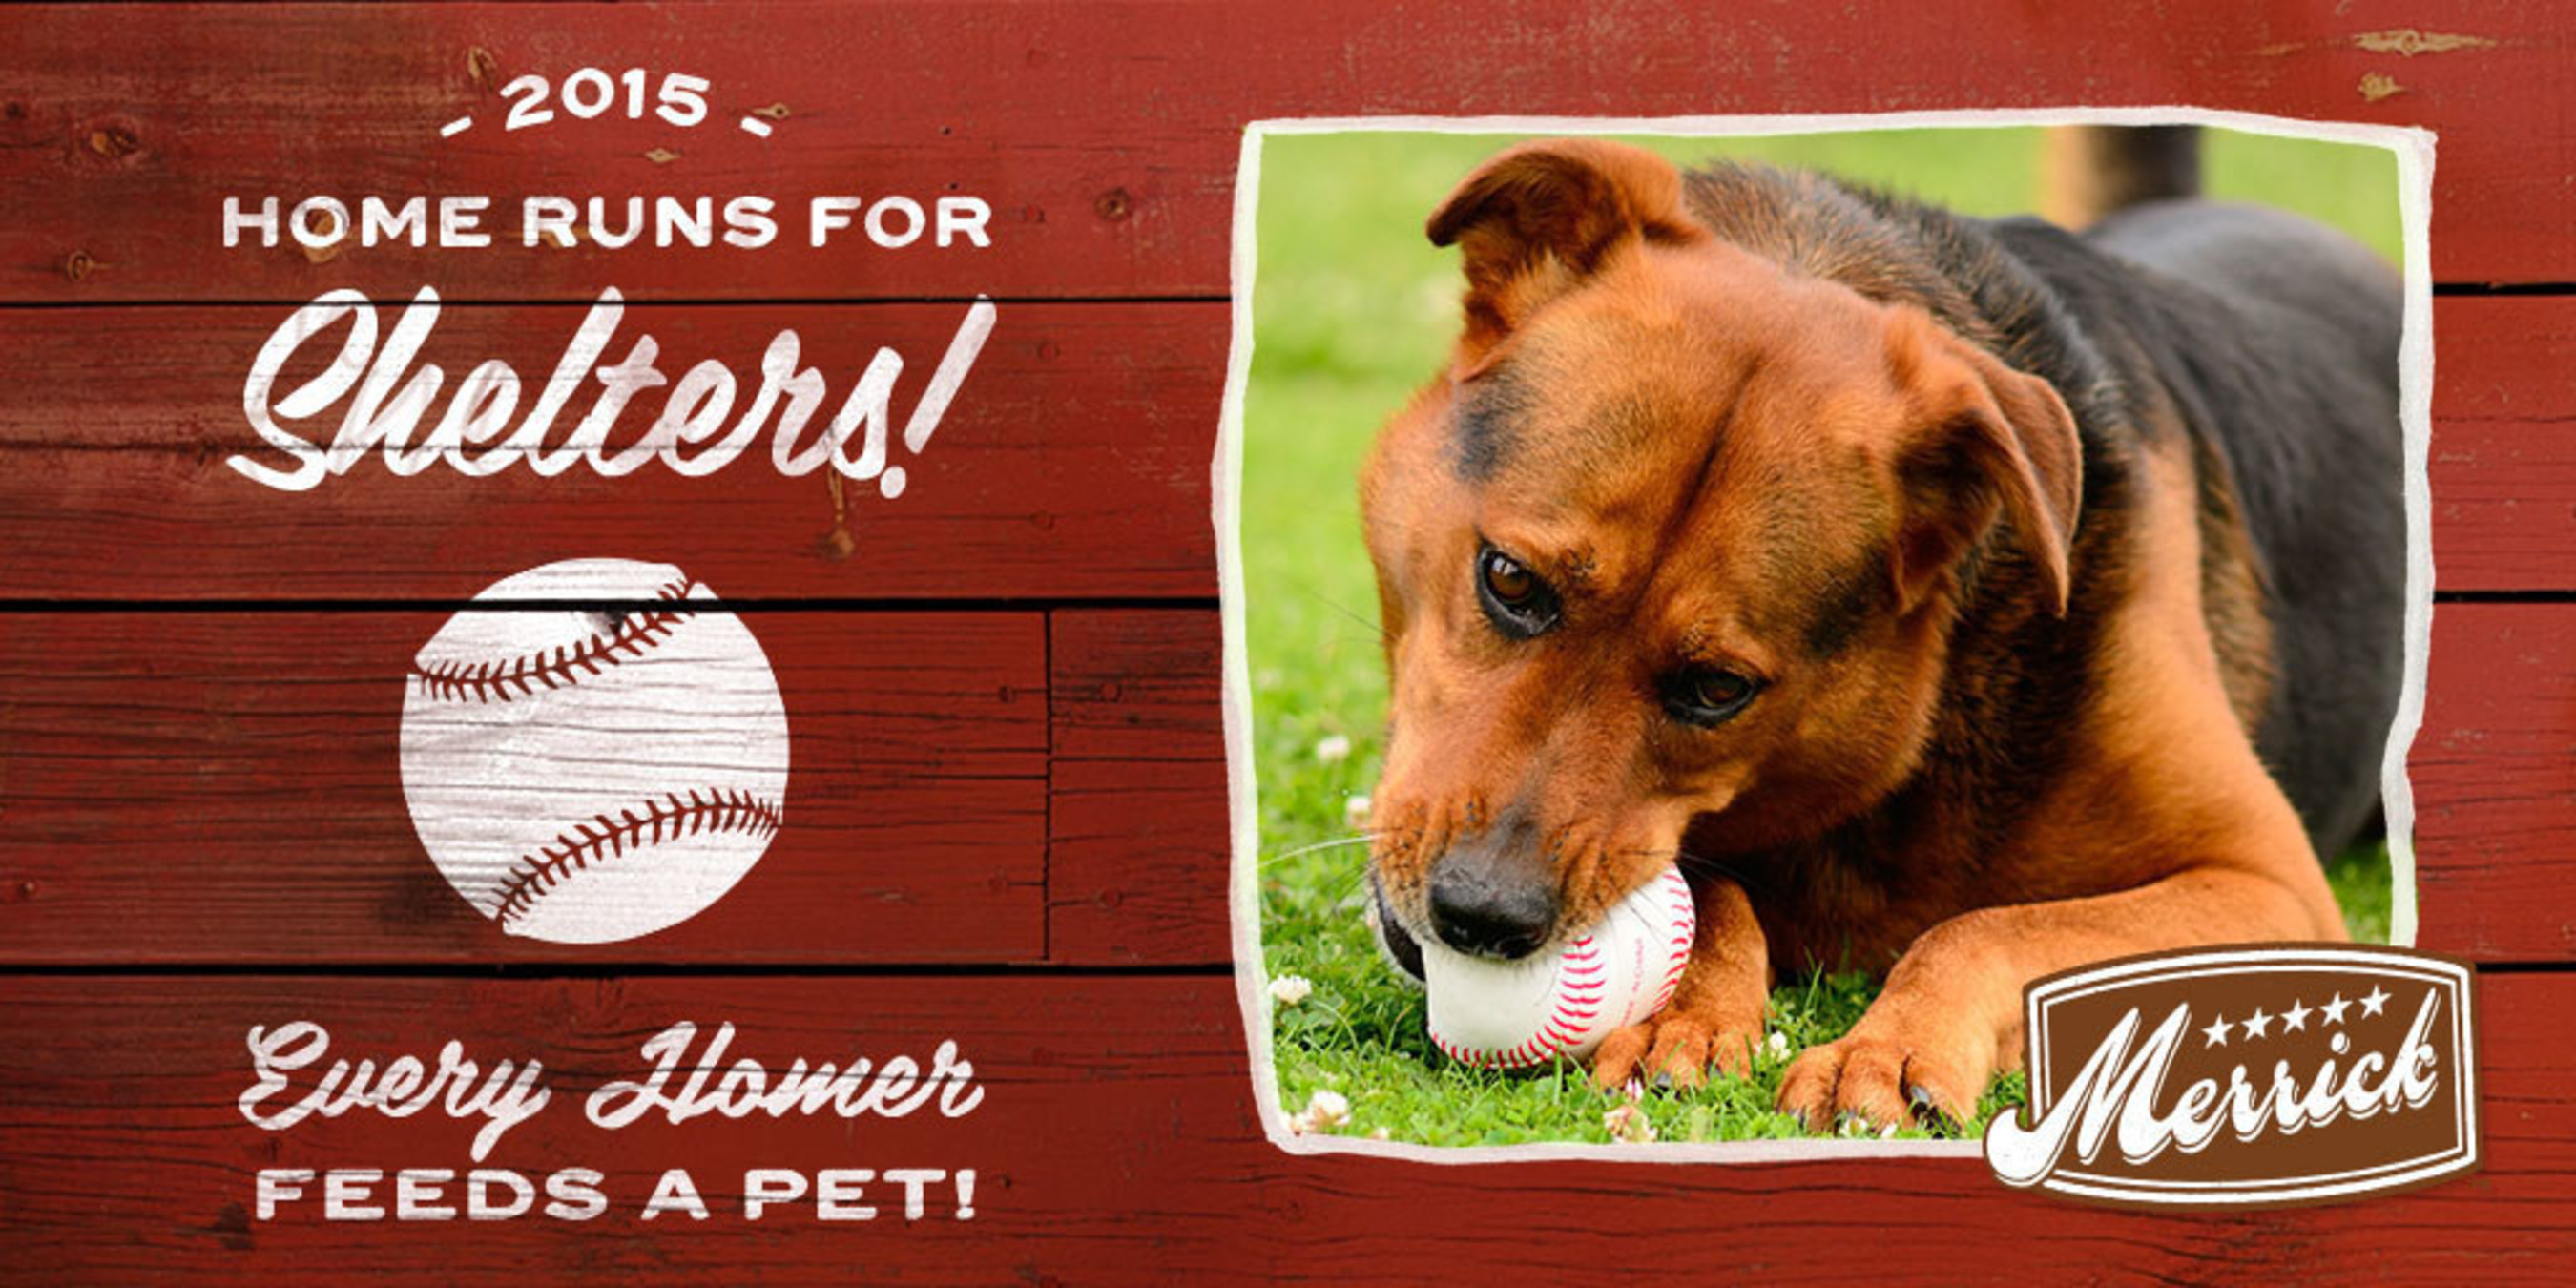 Every homer feeds a pet: Merrick Pet Care donates nearly 50,000 meals to local pet shelters for Homeruns for Shelters.